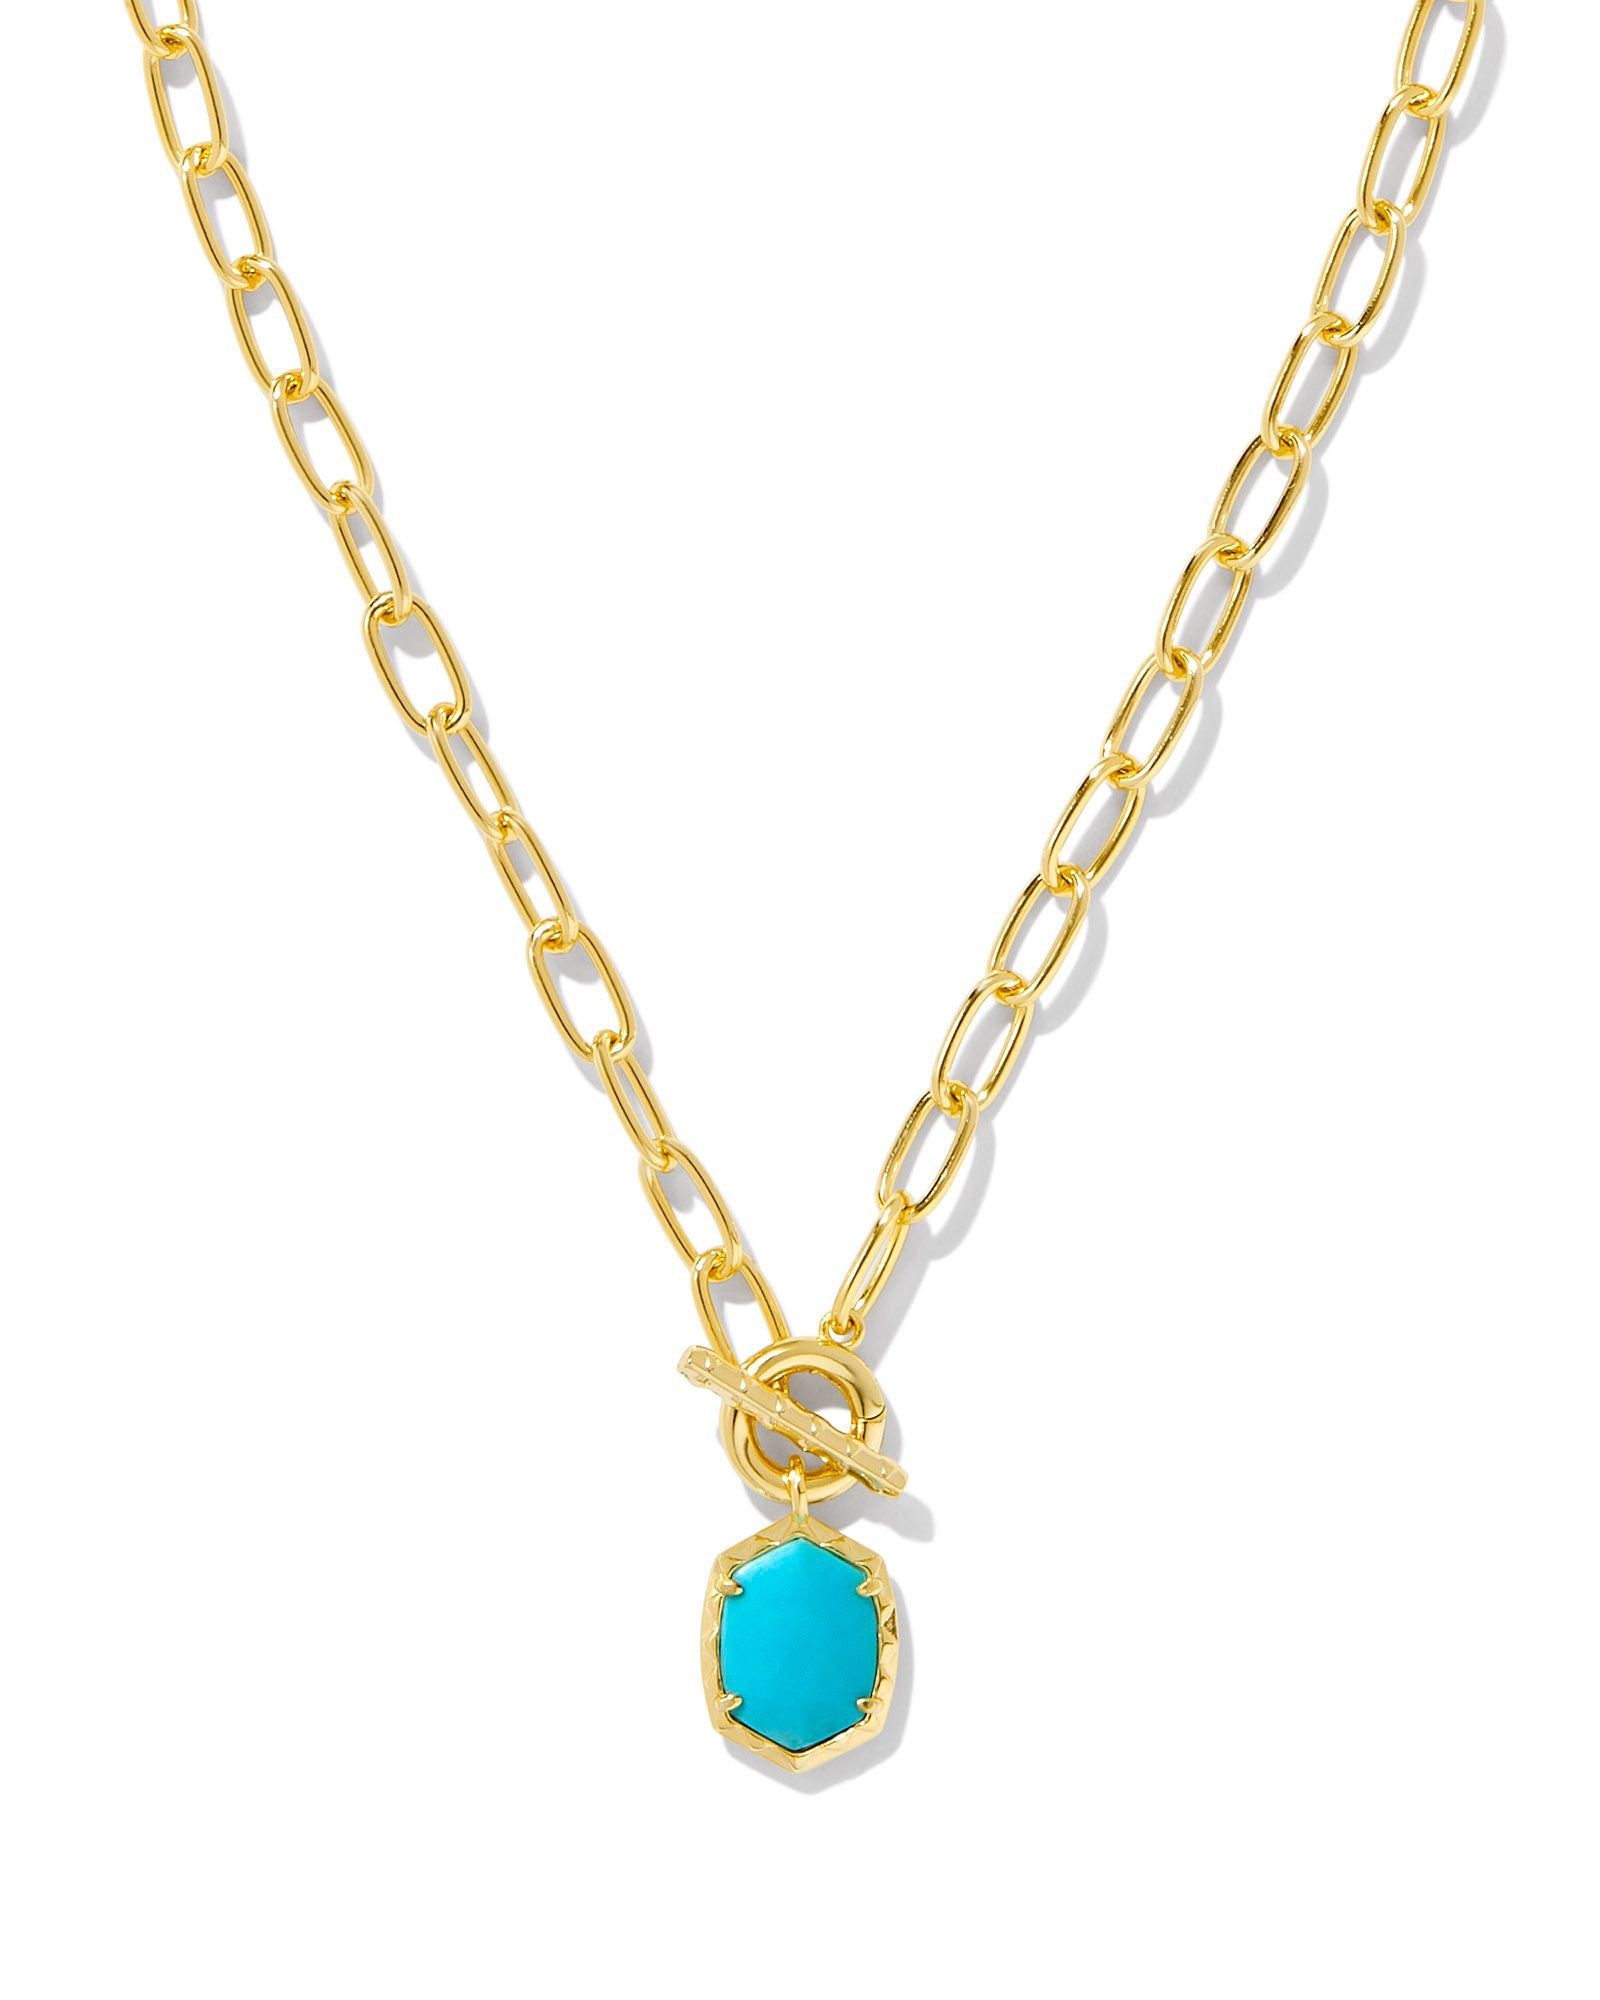 Daphne Gold Link and Chain Necklace Variegated Turquoise Magnesite